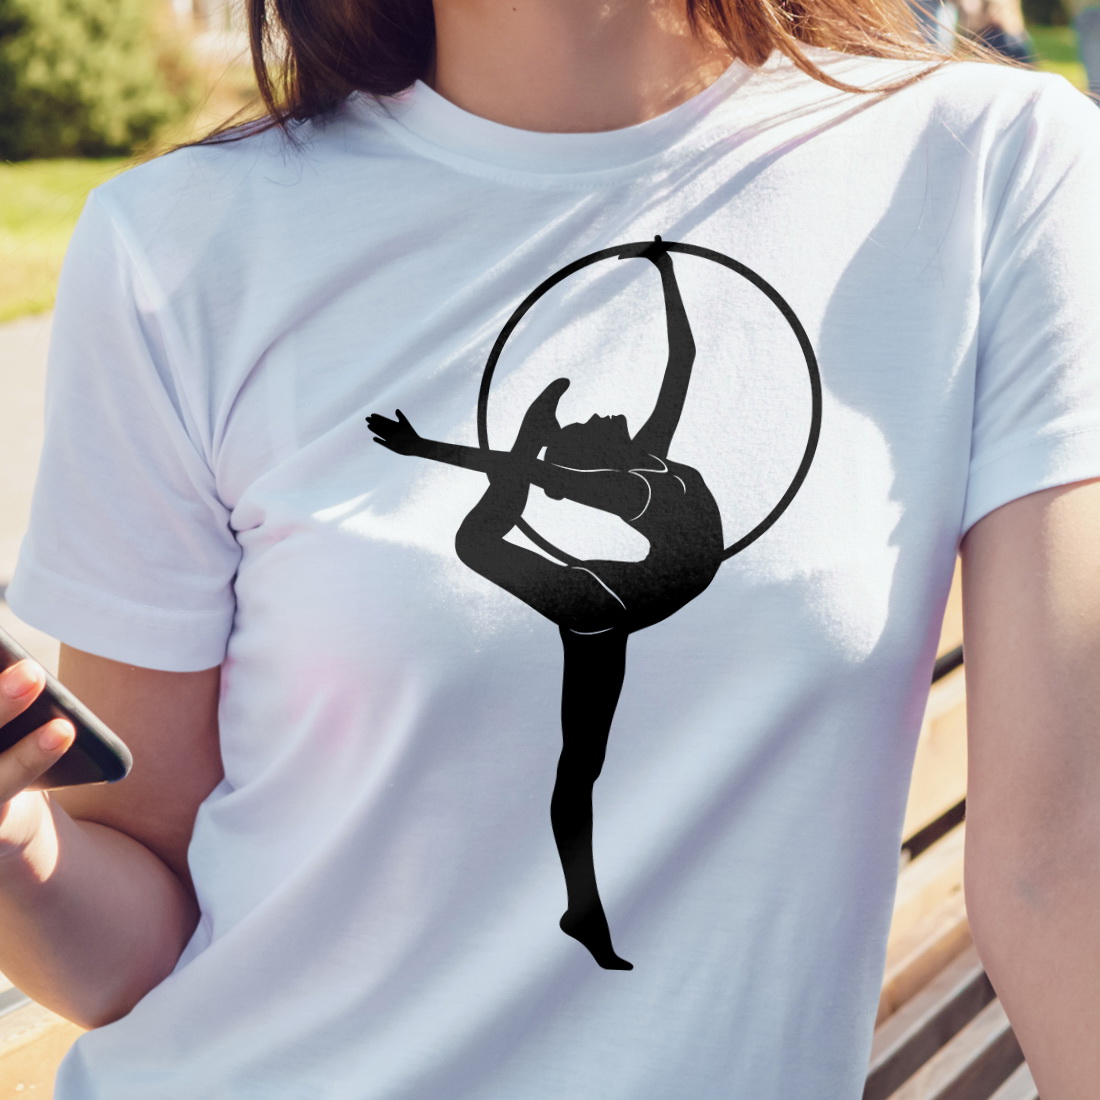 White t-shirt with a gymnast.